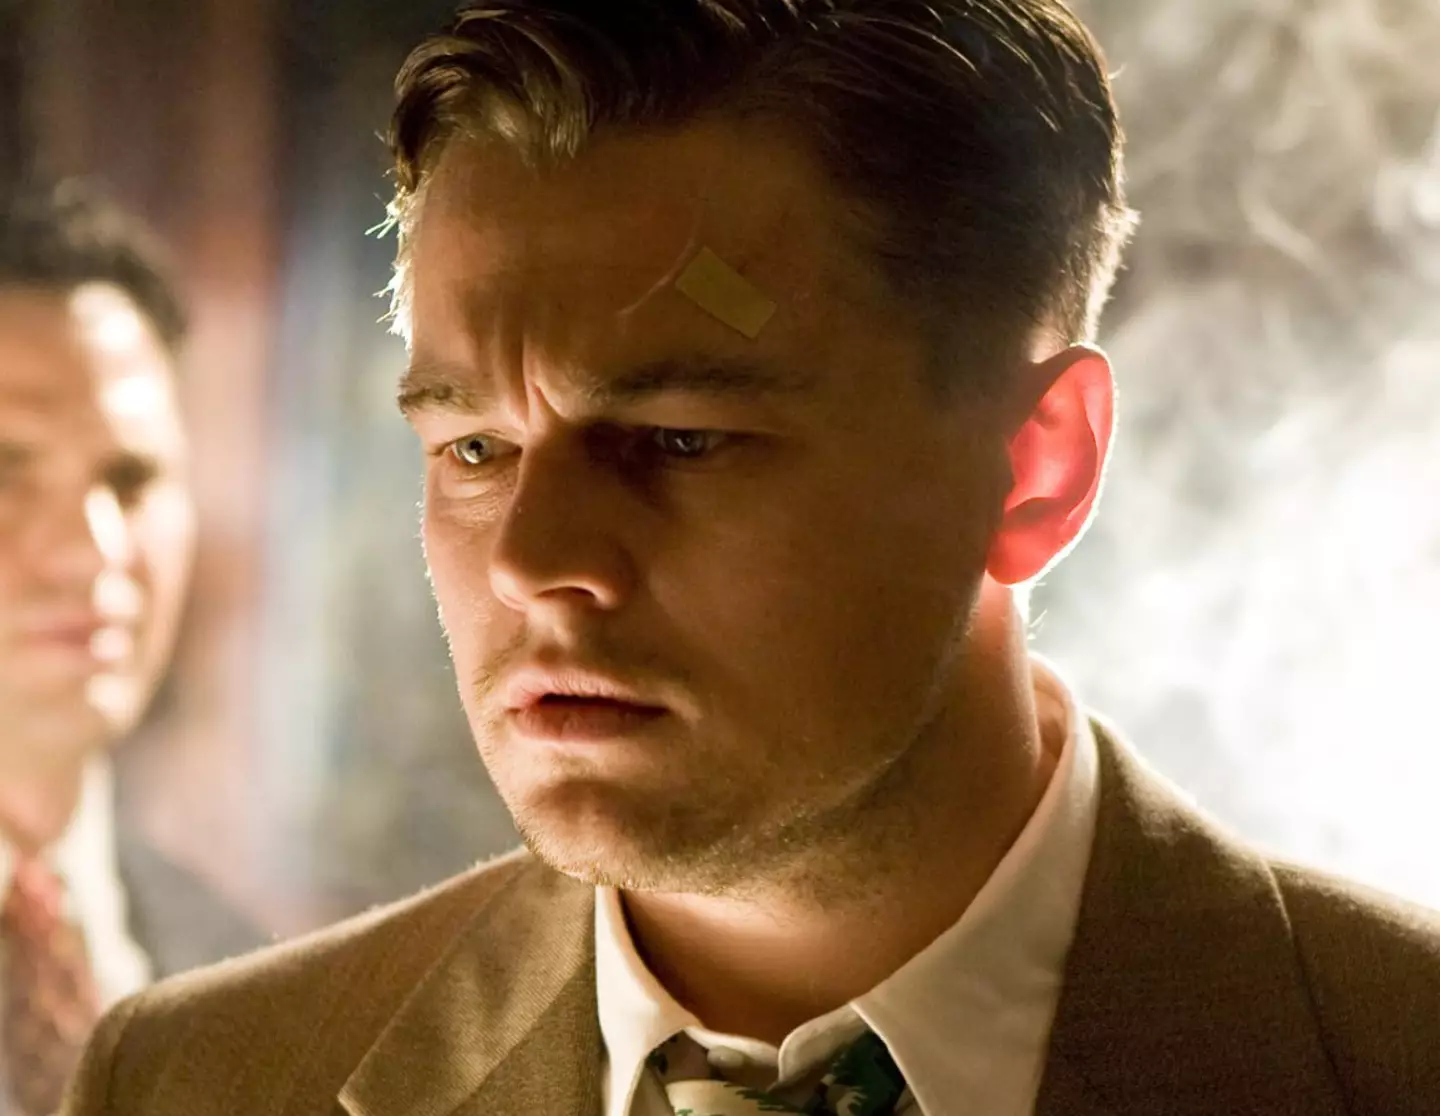 Leonardo DiCaprio starred as a US Marshal in Shutter Island.